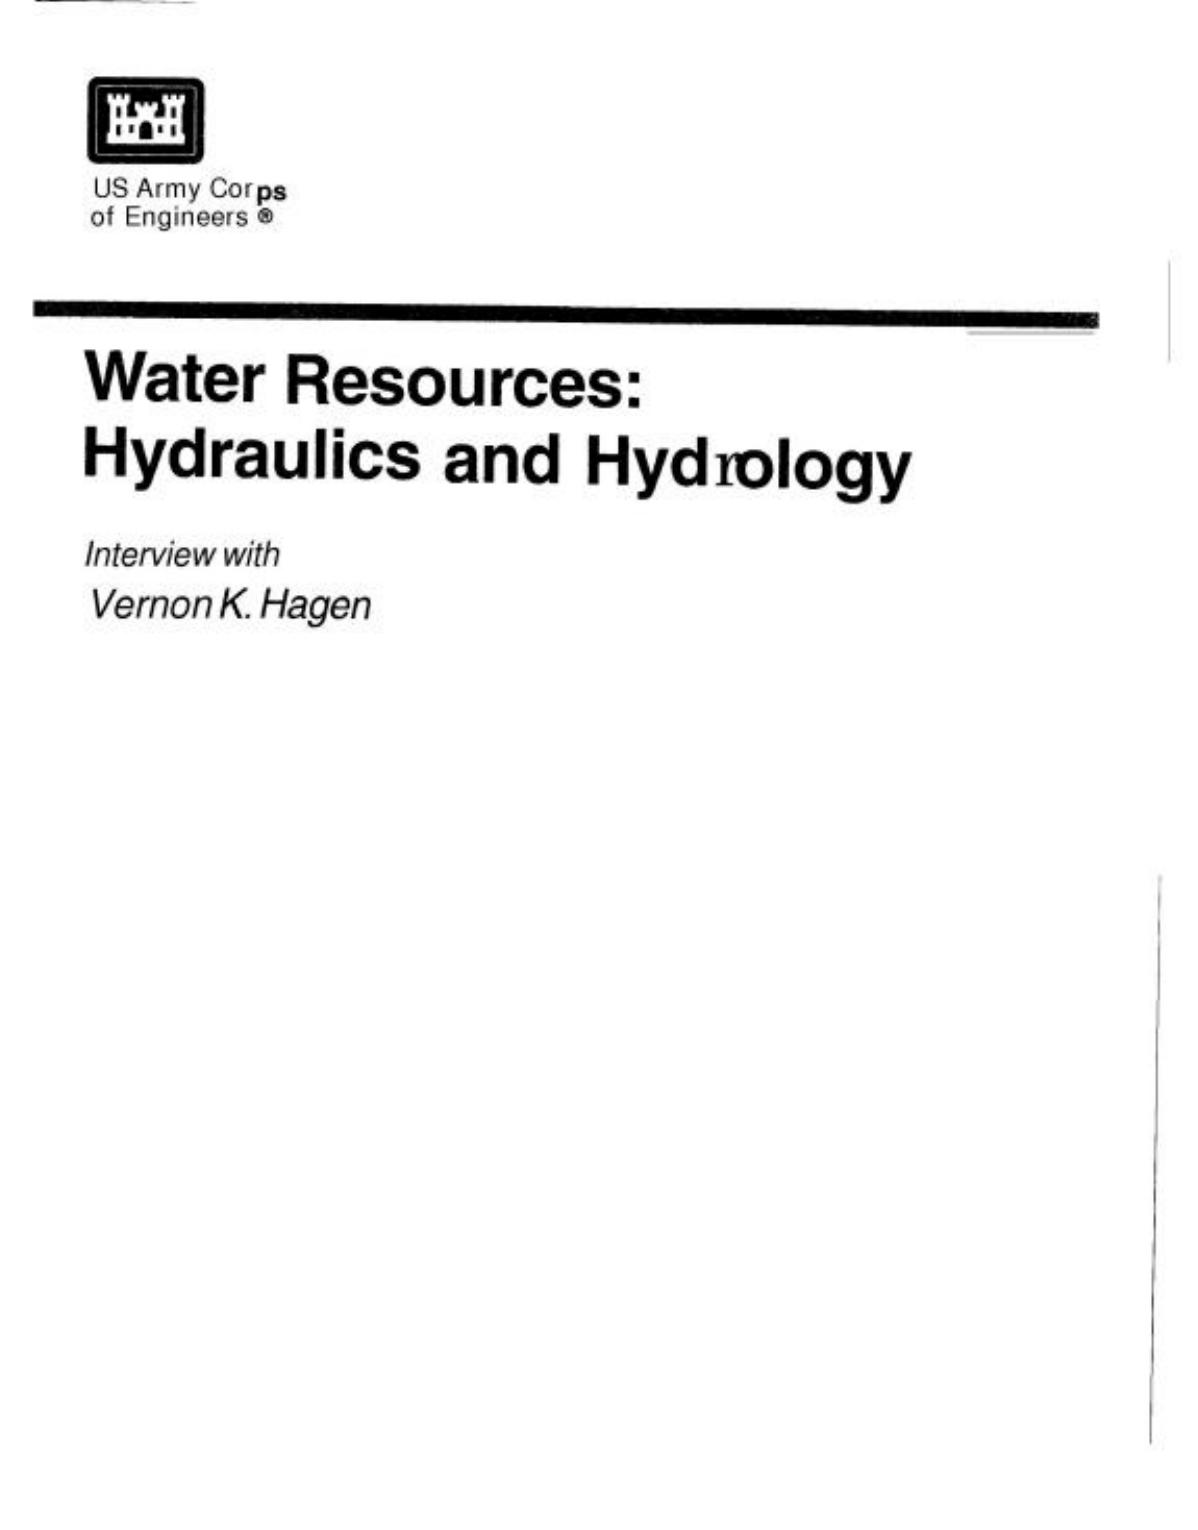 Water Resources: Hydraulics and Hydrology